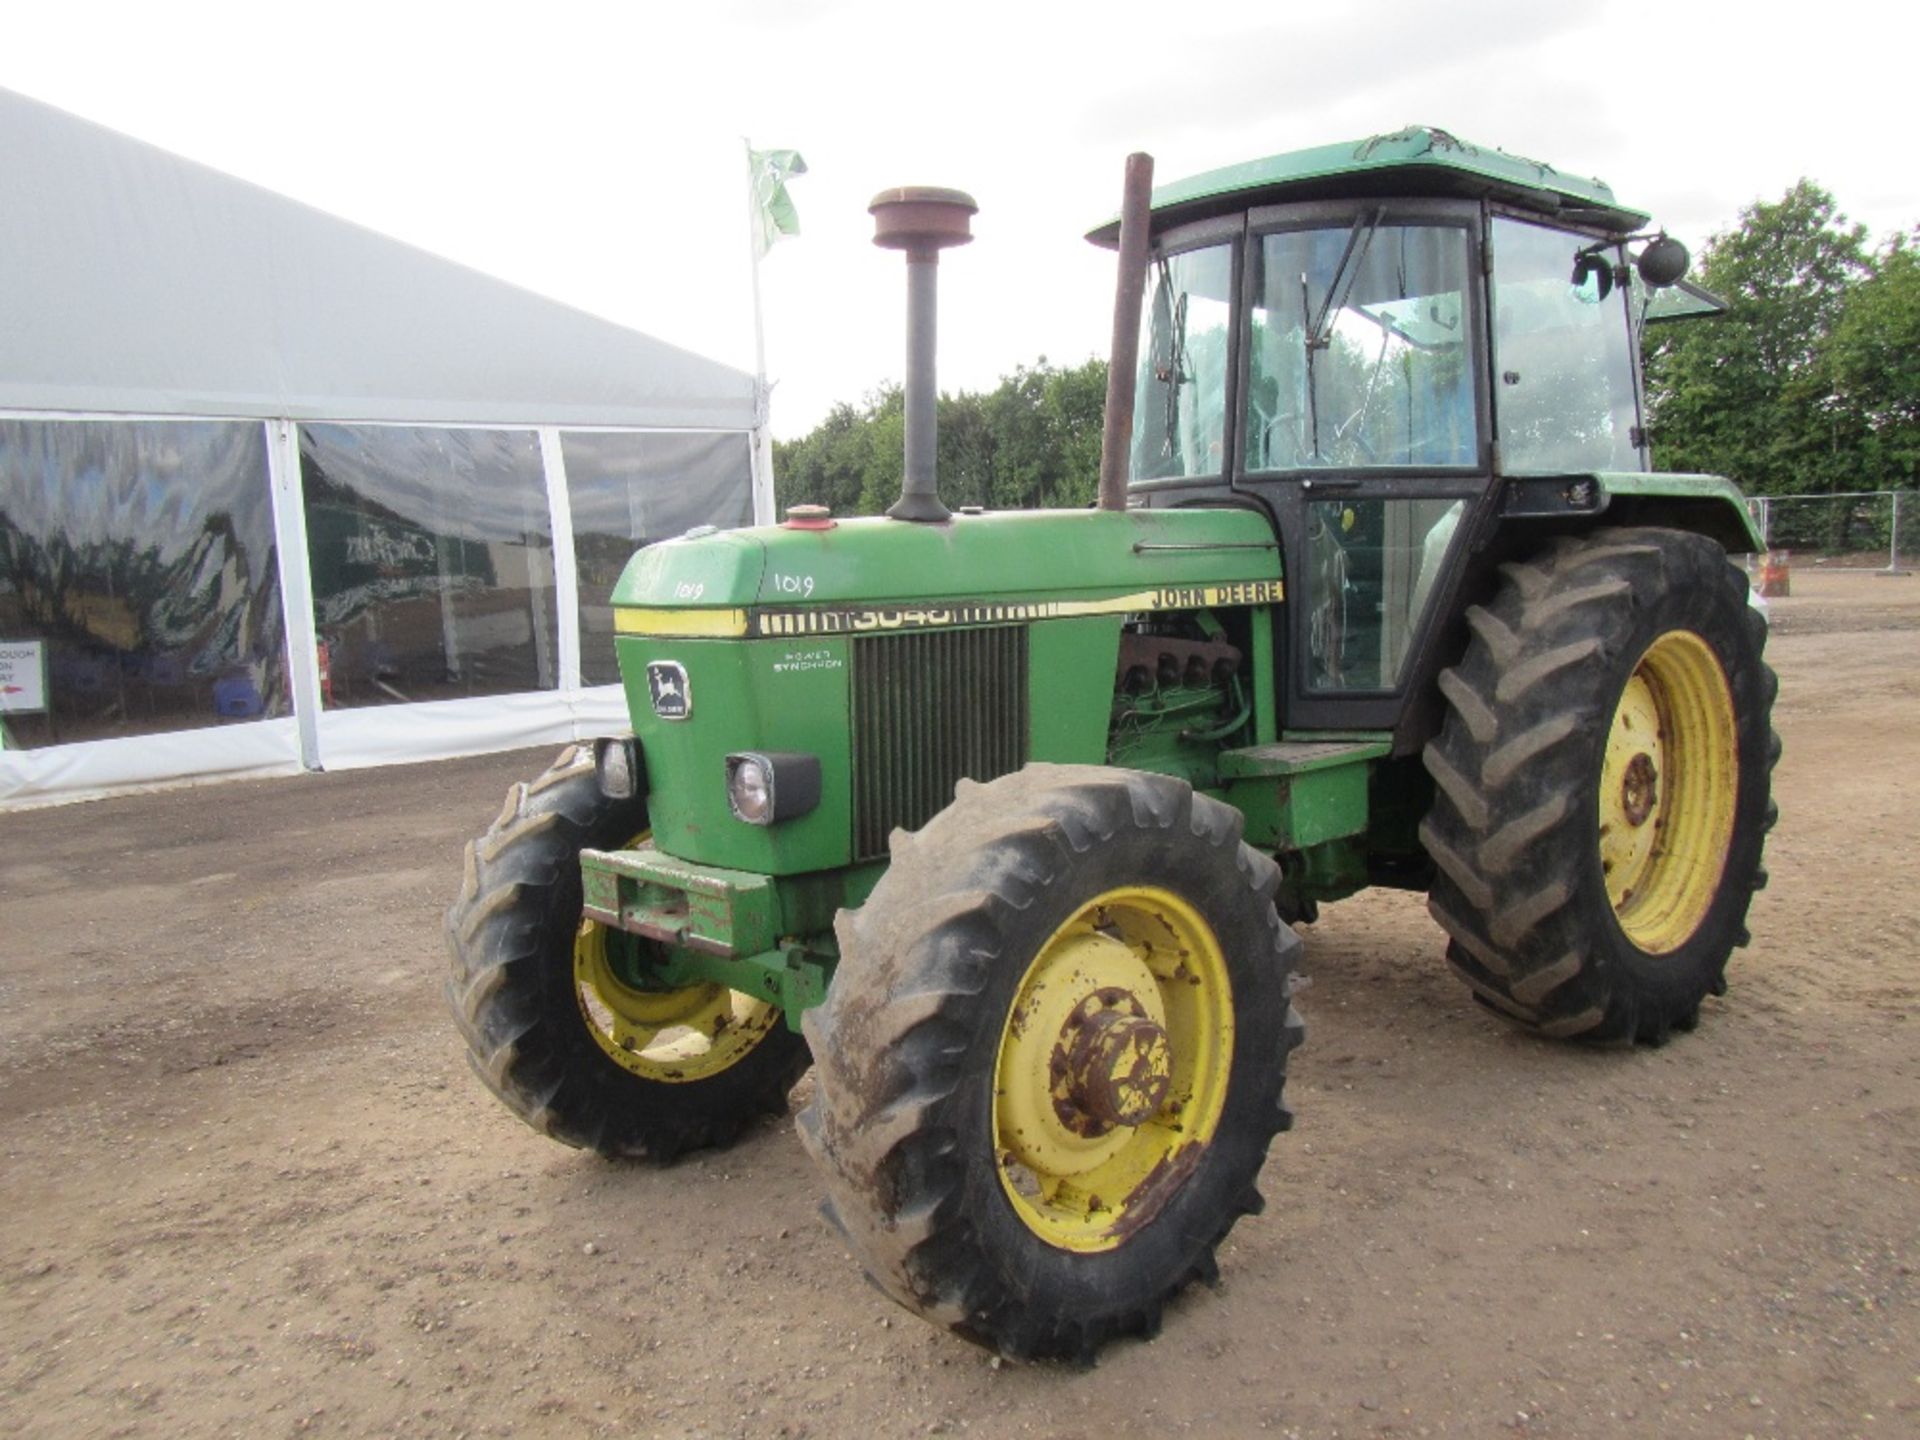 John Deere 3040 4x4 Tractor. Has Been Subject to TOTAL LOSS INSURANCE CLAIM. Reg. No. A122 VFE